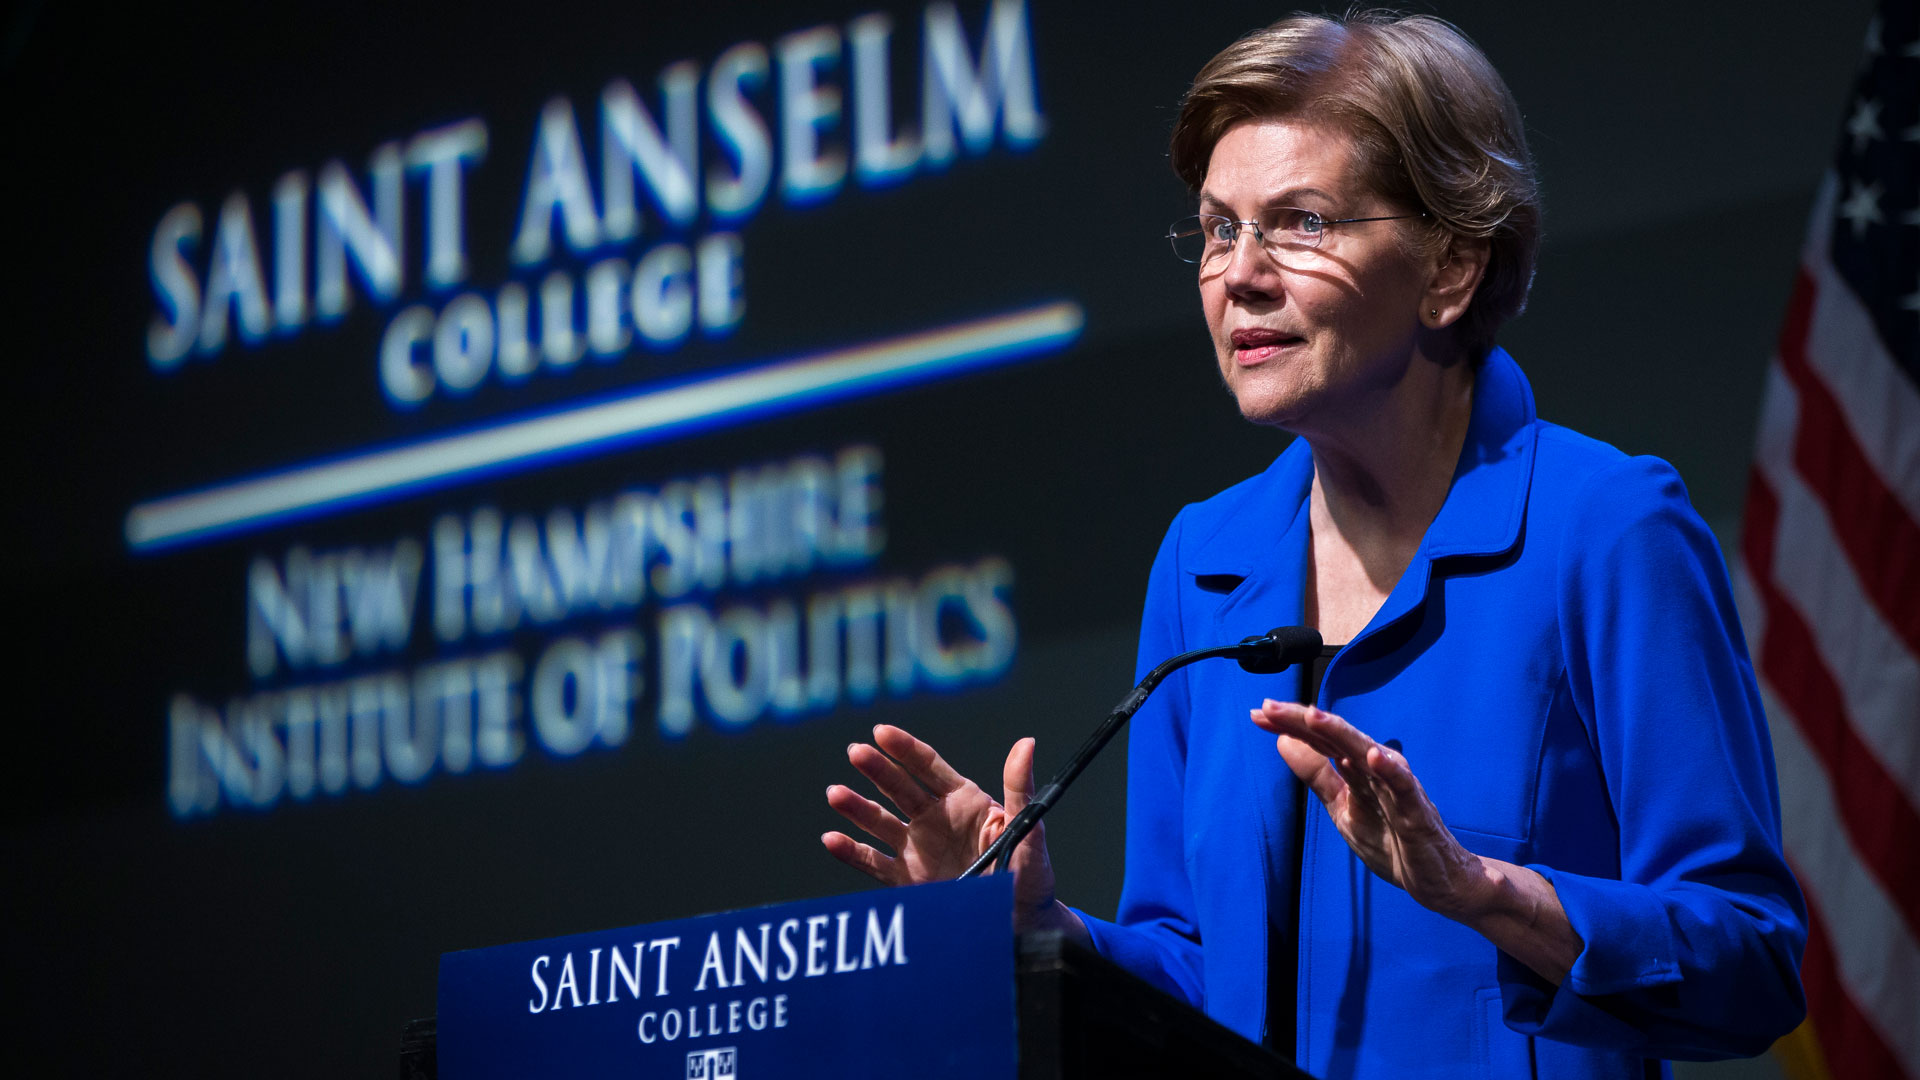 Citing Panama Papers, Warren announces plan to fight global corruption